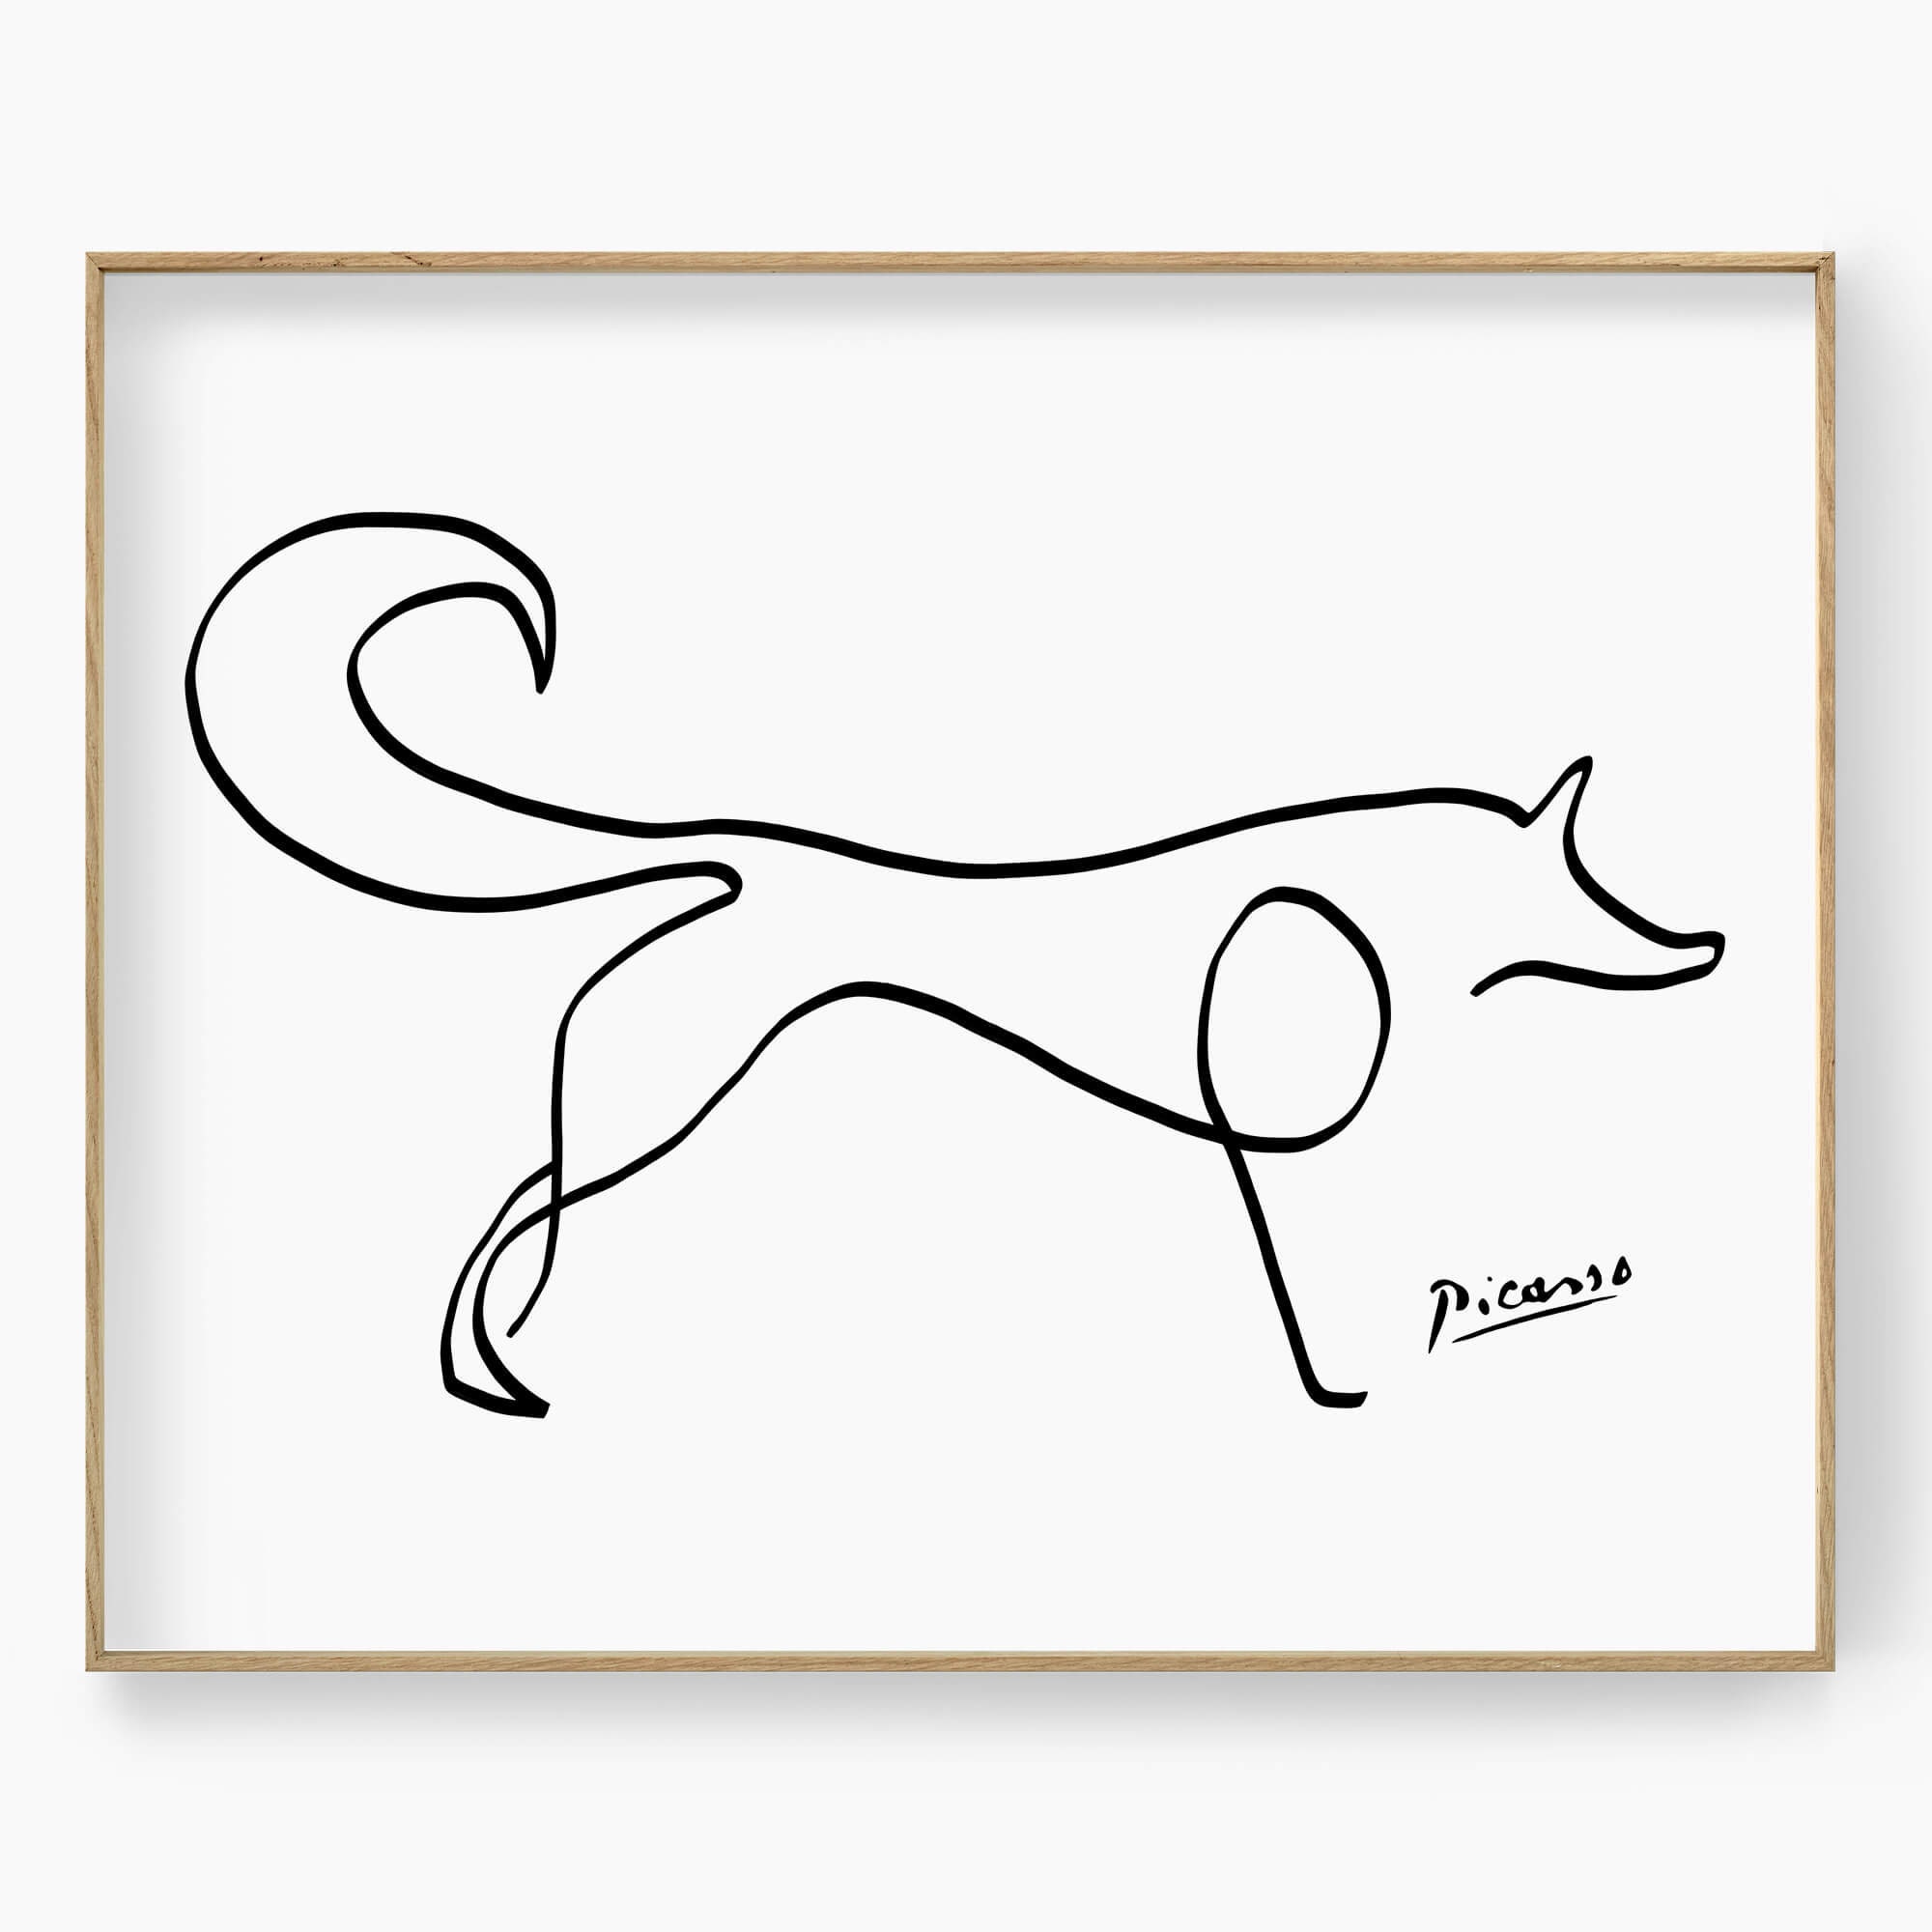 Picasso Fox Sketch, Fox Animal Line Art, Minimal Picasso Drawing, Picasso  Exhibition Poster, Picasso Fox Print, Nursery Modern Gallery Wall 